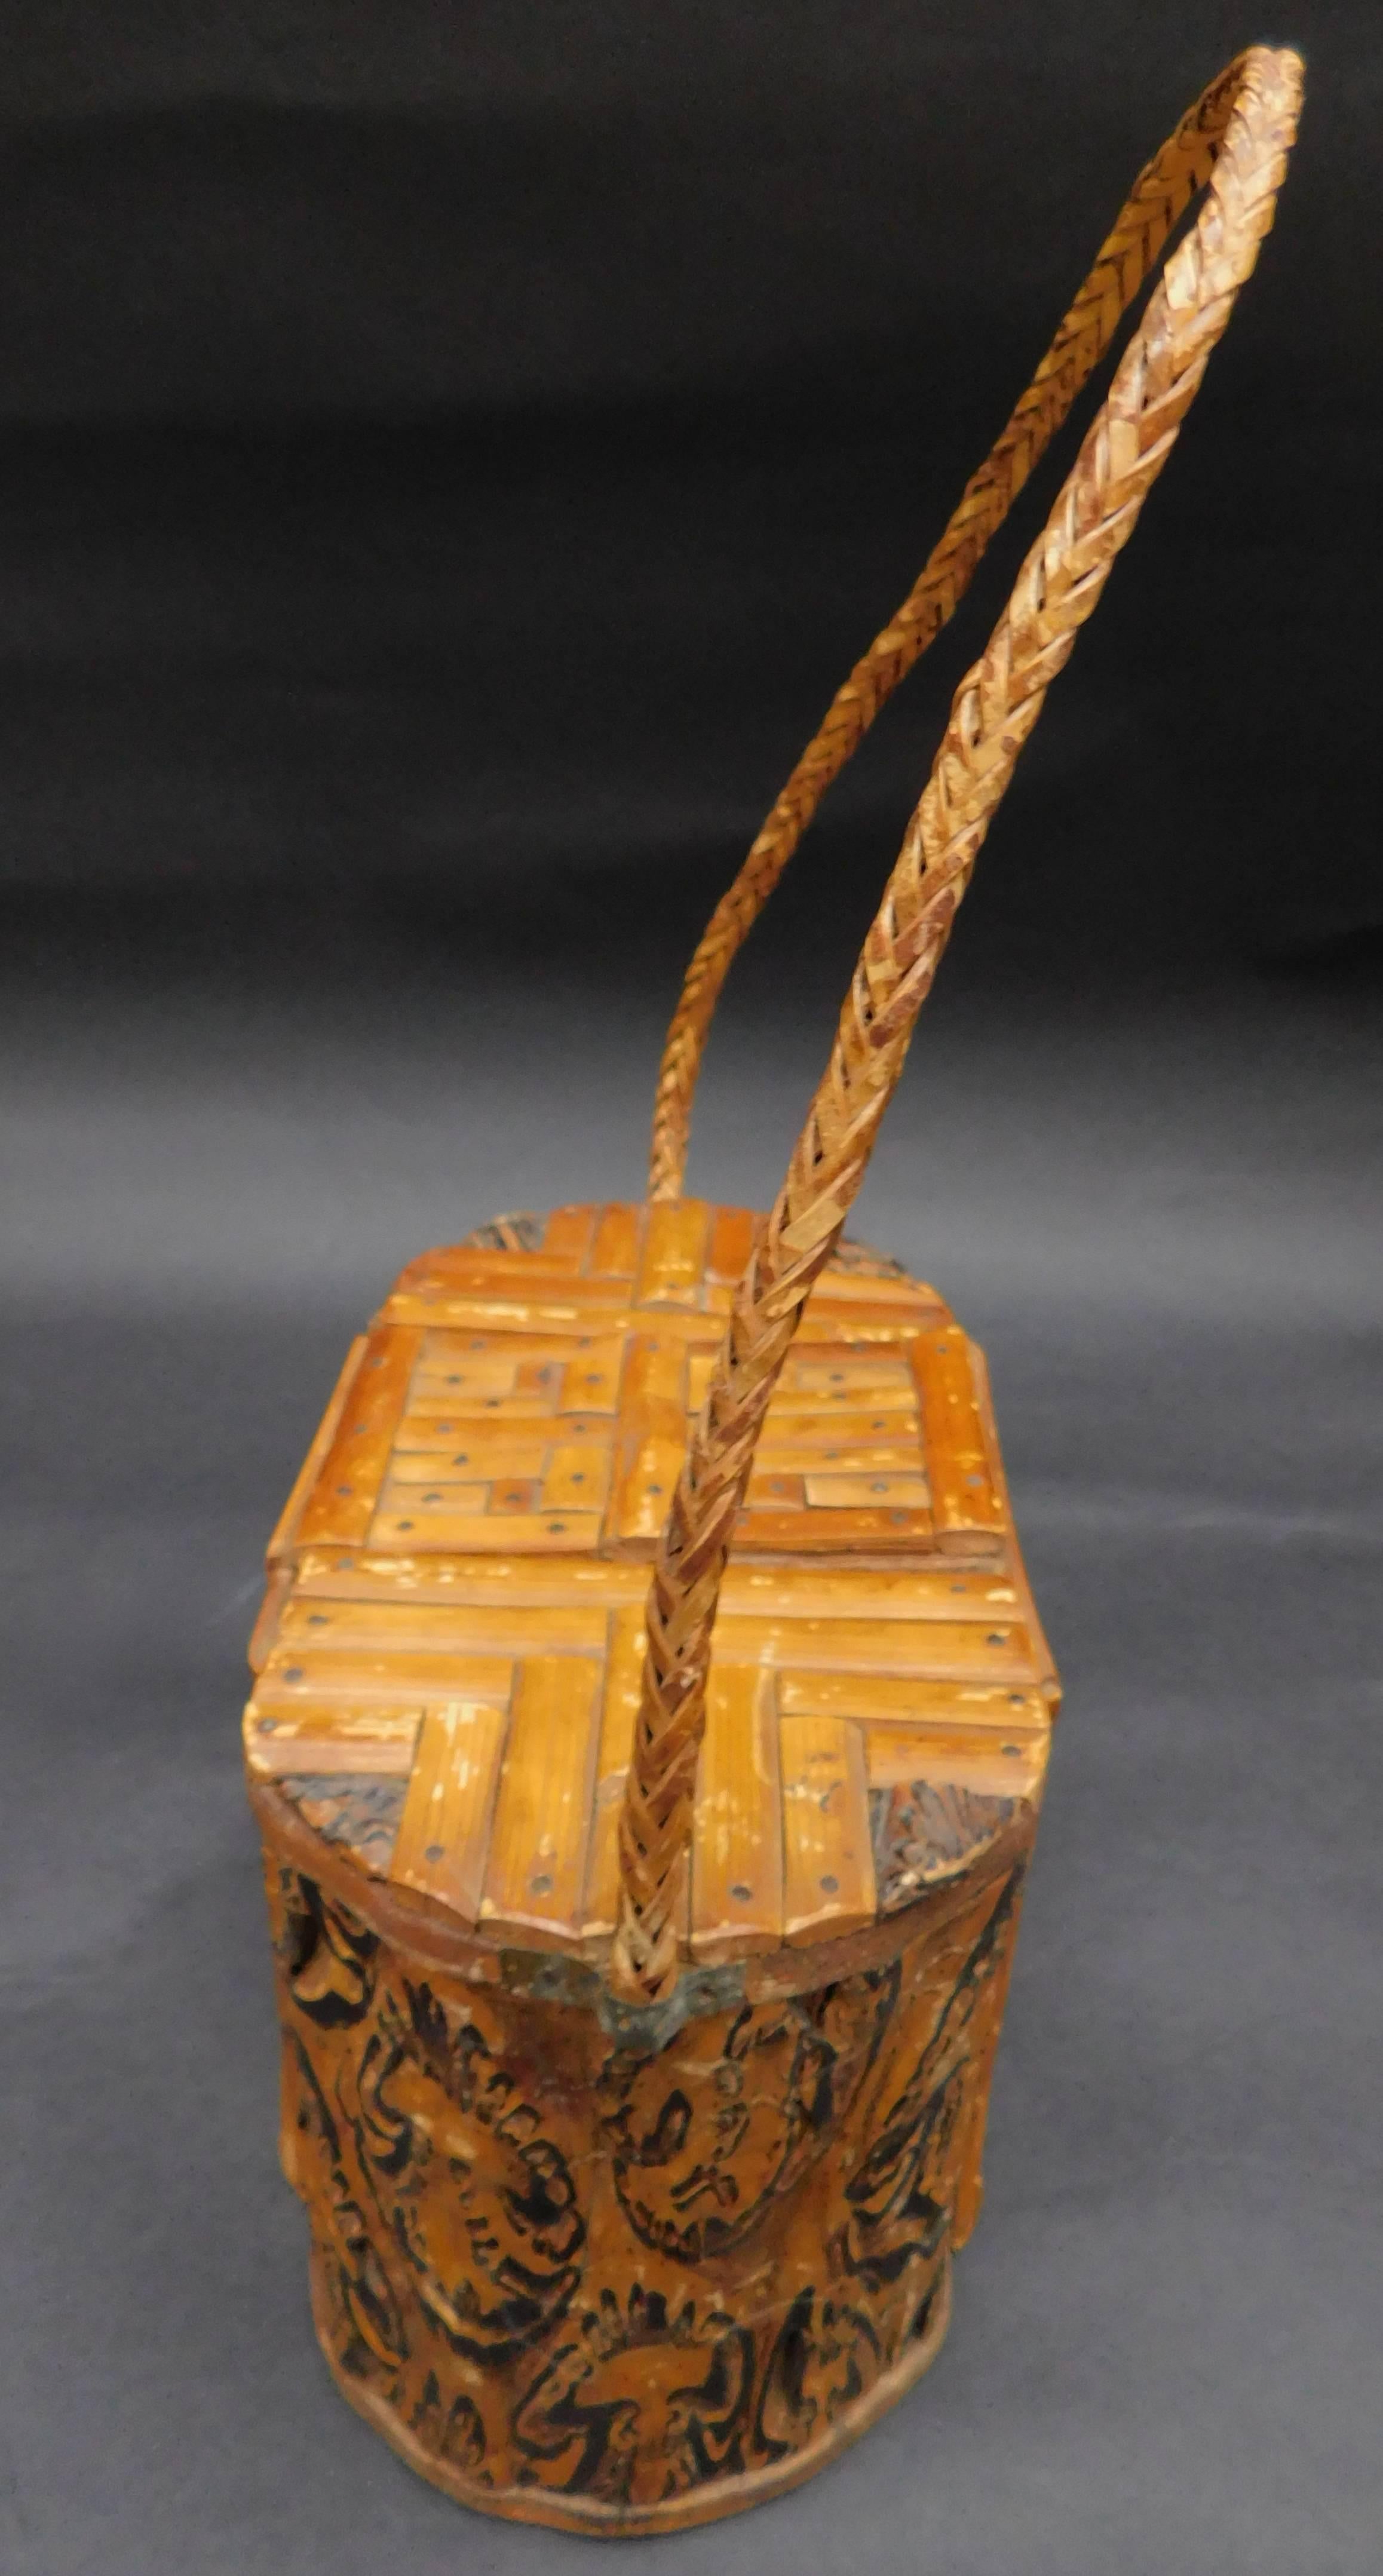 An unusual African wood box with woven rattan handle. The box is hand made piecing together wood to form a curved body. The front, back and top are constructed with bamboo to form maze like square shapes and a hidden lift up lid.
Height with handle